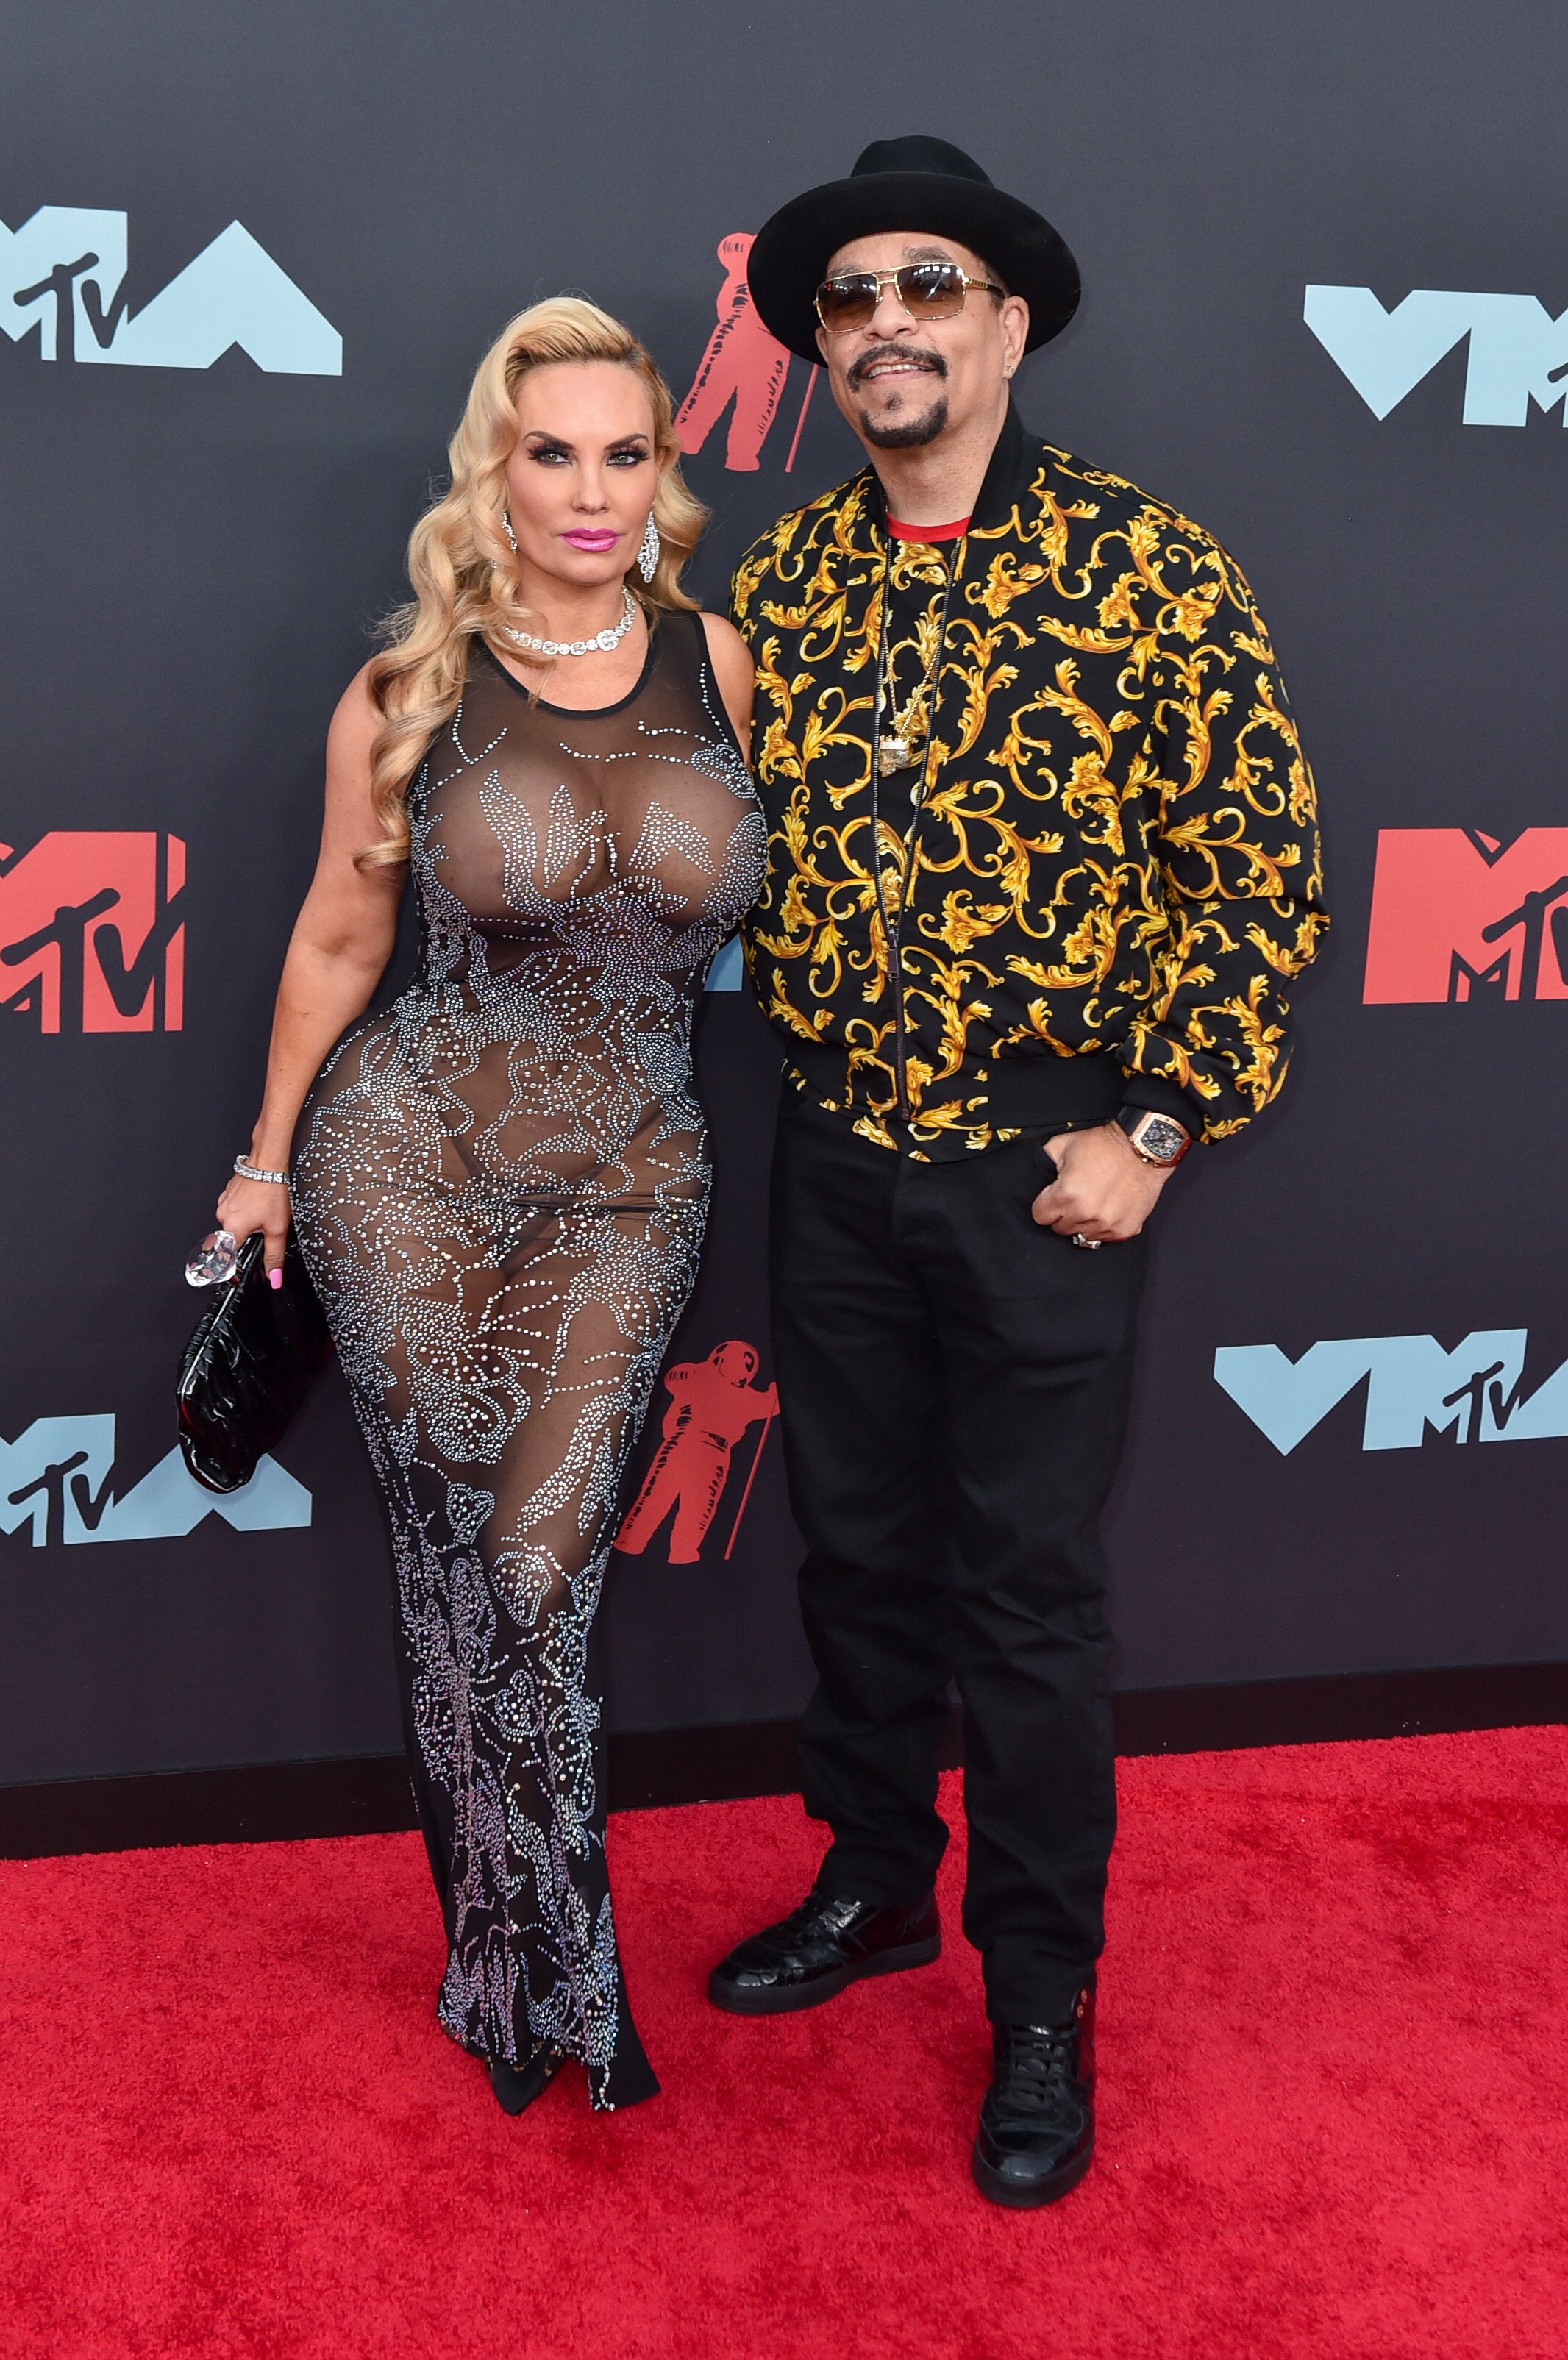 Ice-T and Coco attend the 2019 MTV Video Music Awards red carpet at Prudential Center on August 26, 2019 in Newark, New Jersey. | Source: Getty Images